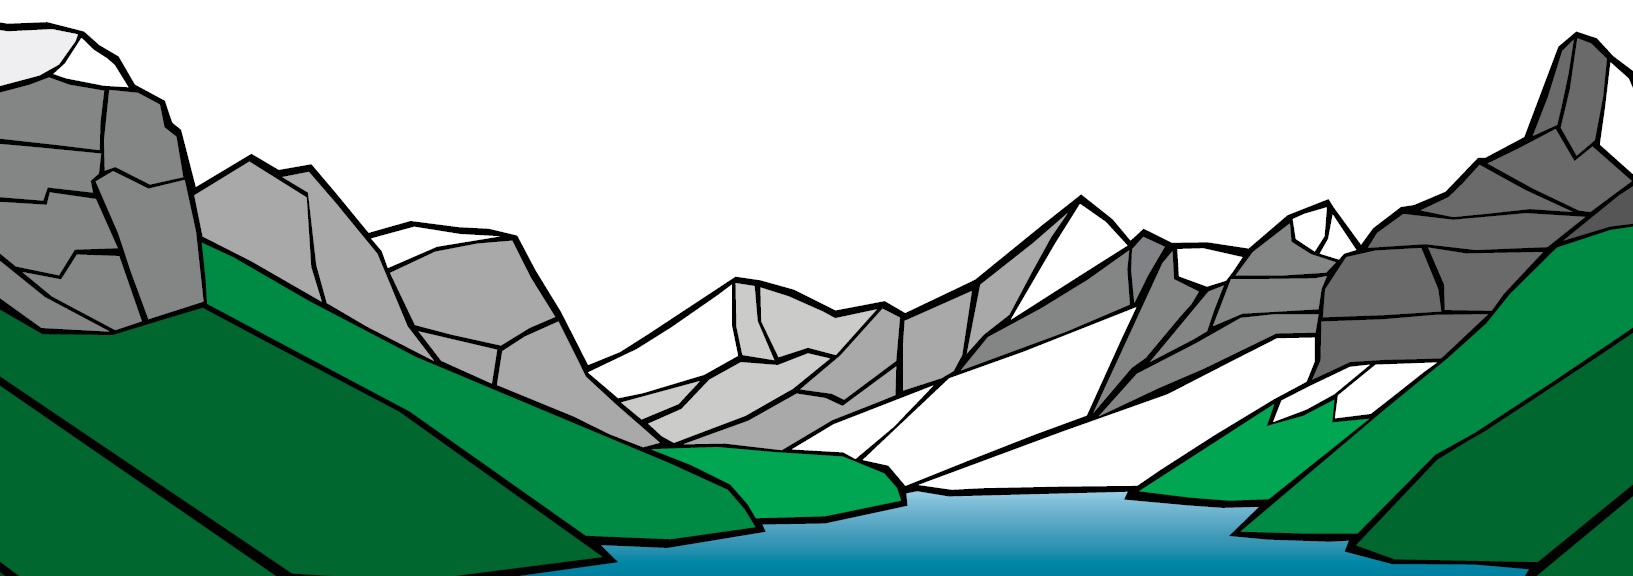 Illustration of a lake in the mountains